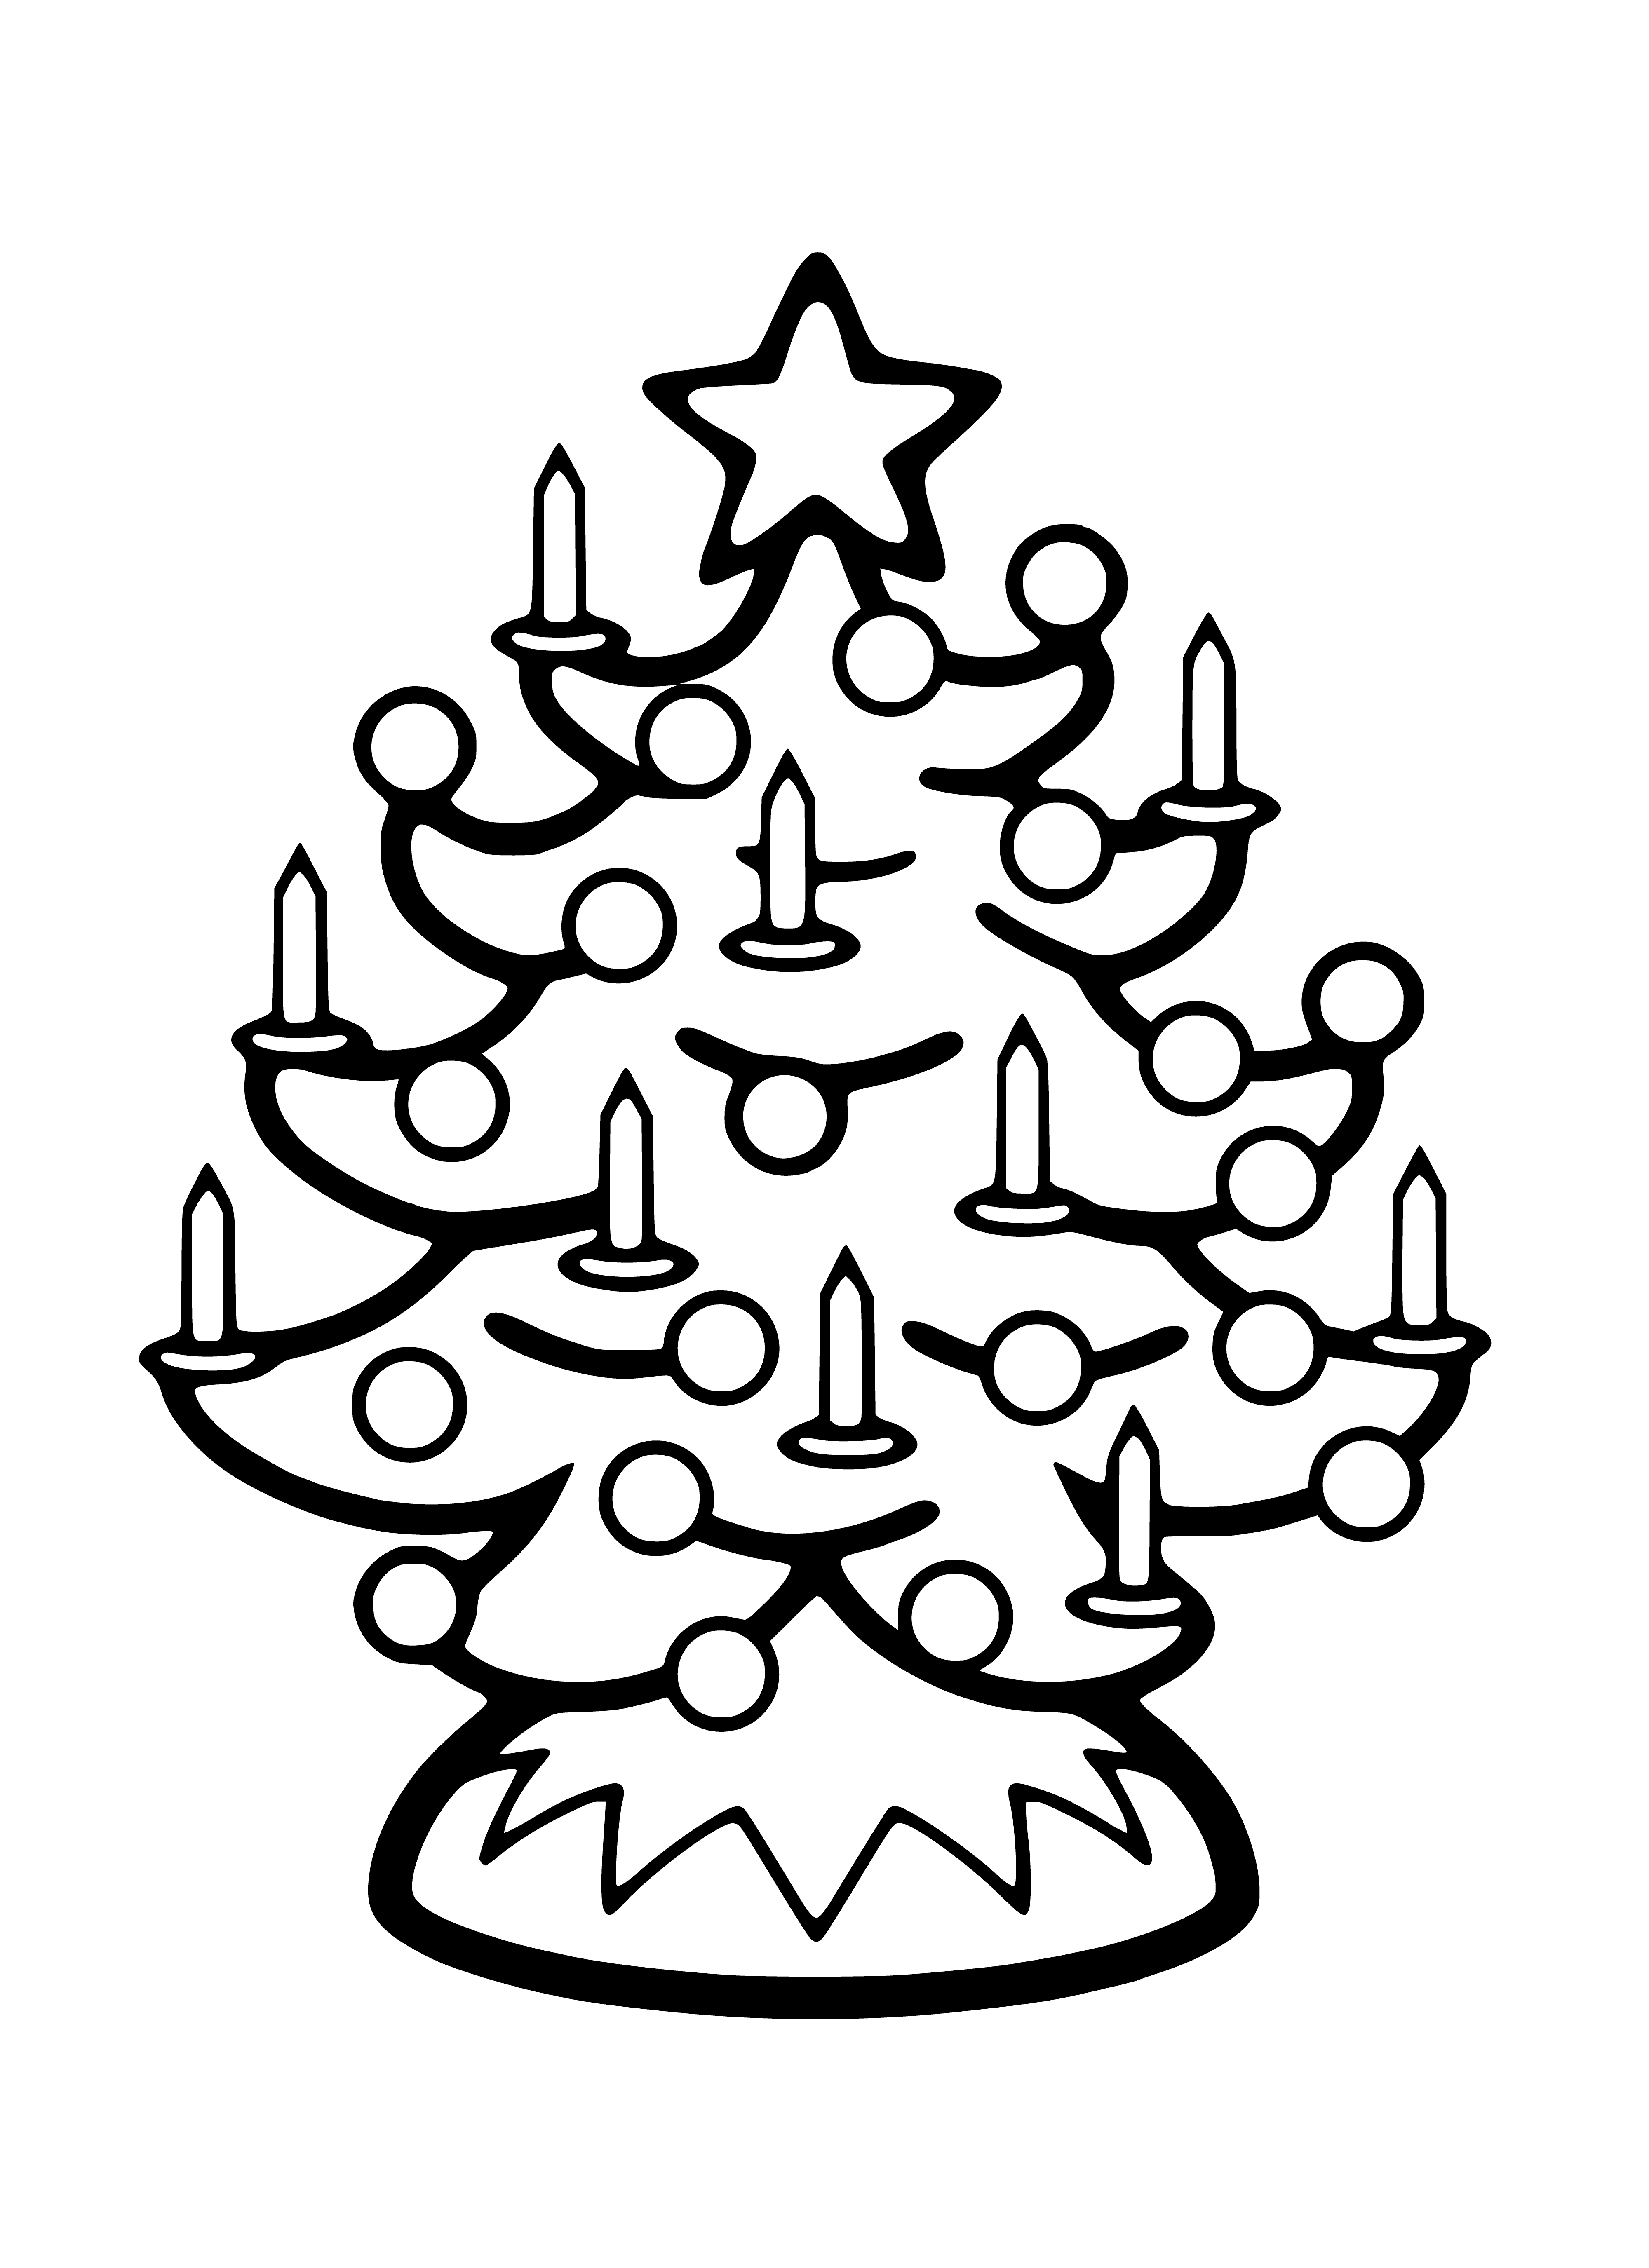 coloring page: Coloring page of a Christmas tree with various colored candles, star, snowflake & candy cane ornaments.